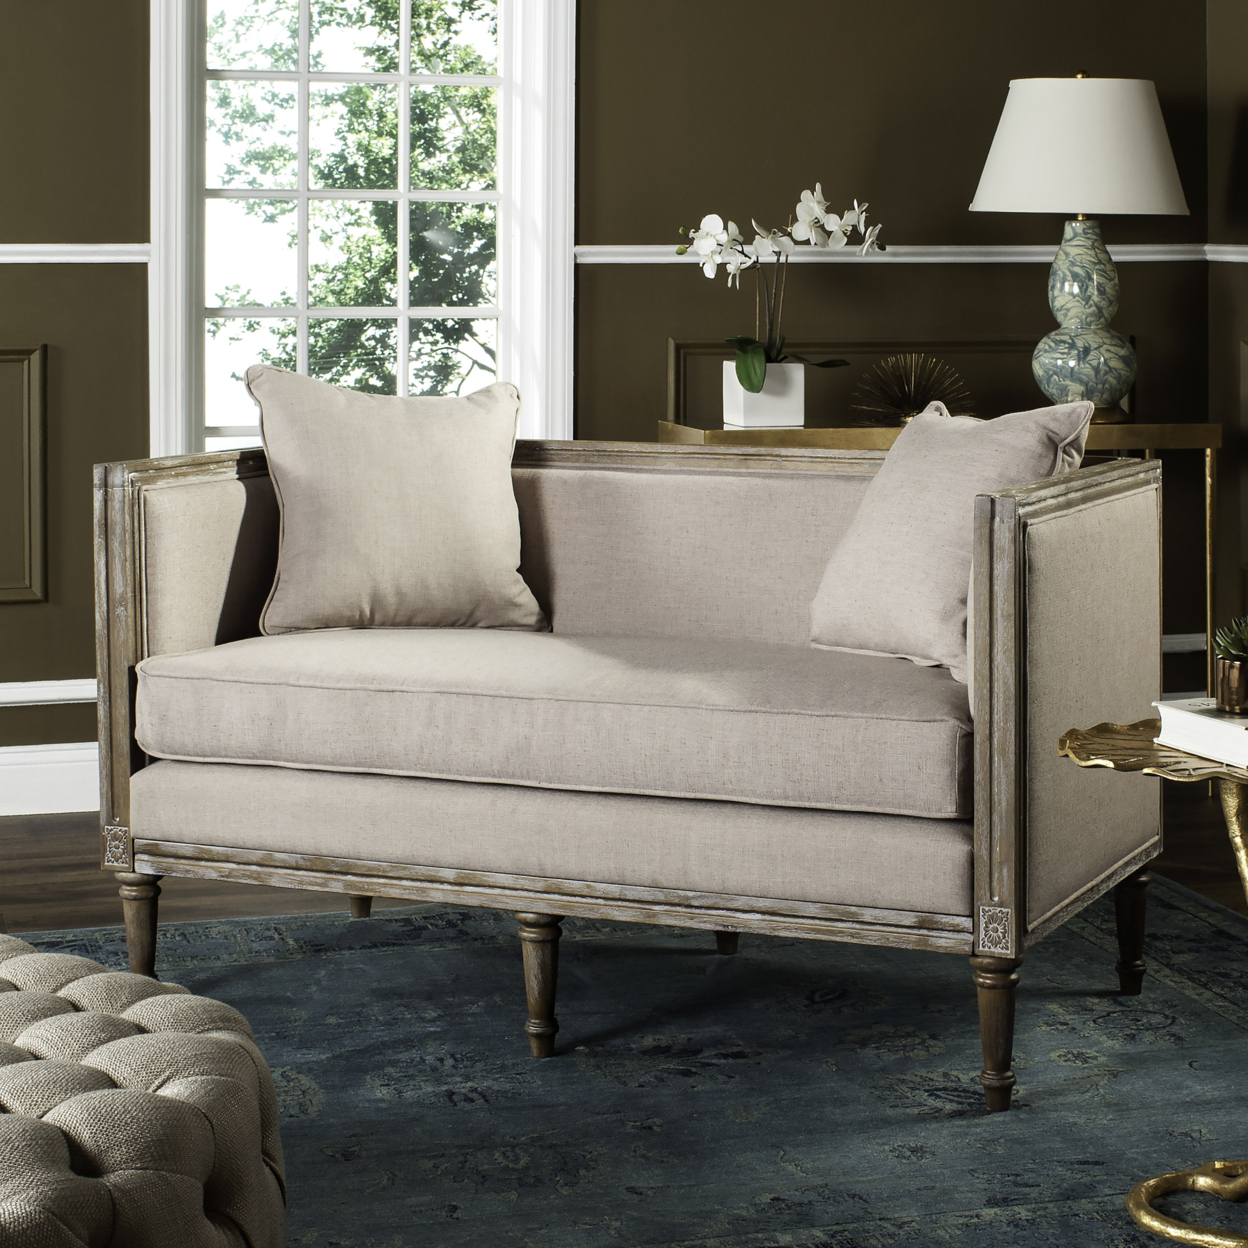 SAFAVIEH Leandra Linen French Country Settee Taupe / Rustic Oak